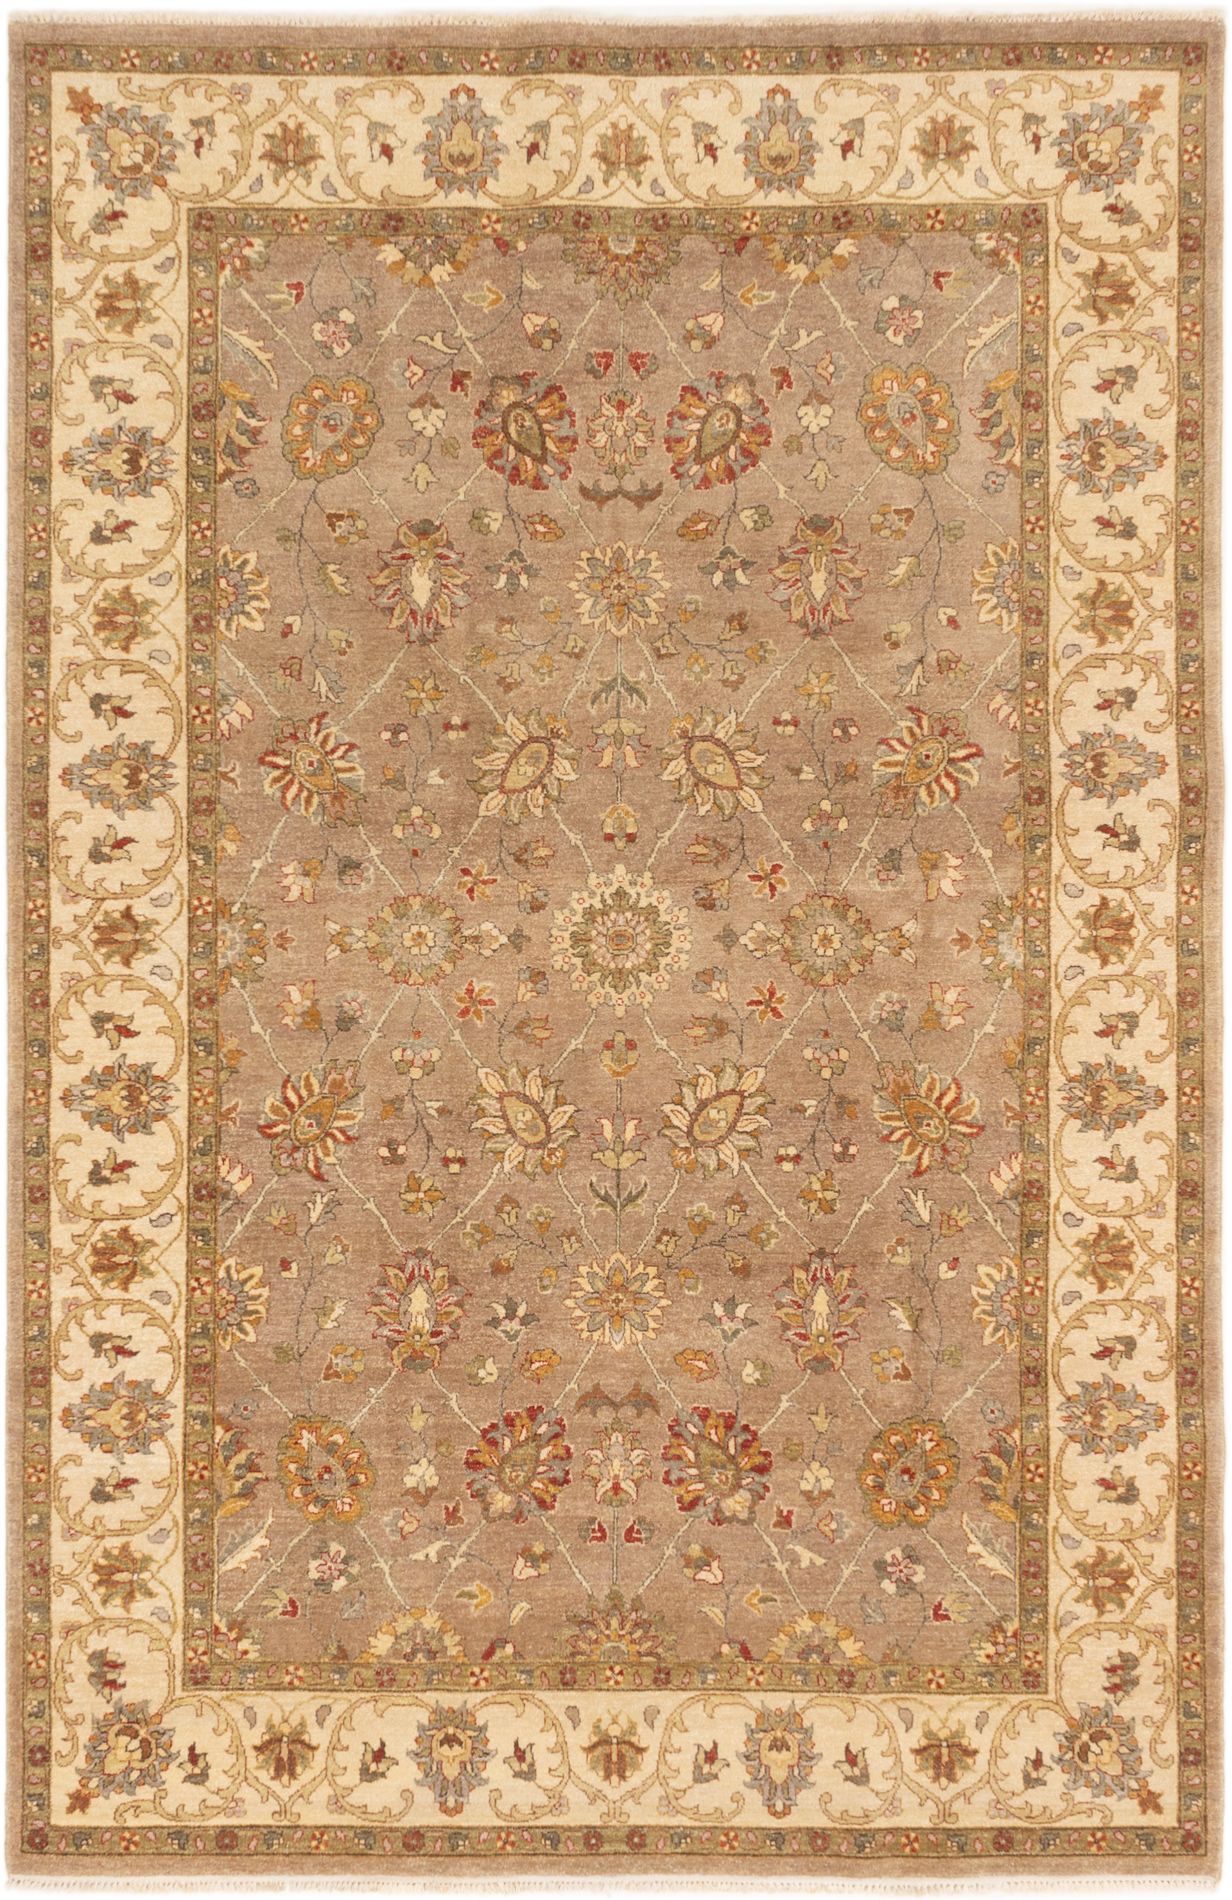 Hand-knotted Chobi Twisted Brown Wool Rug 6'5" x 9'10" Size: 6'5" x 9'10"  